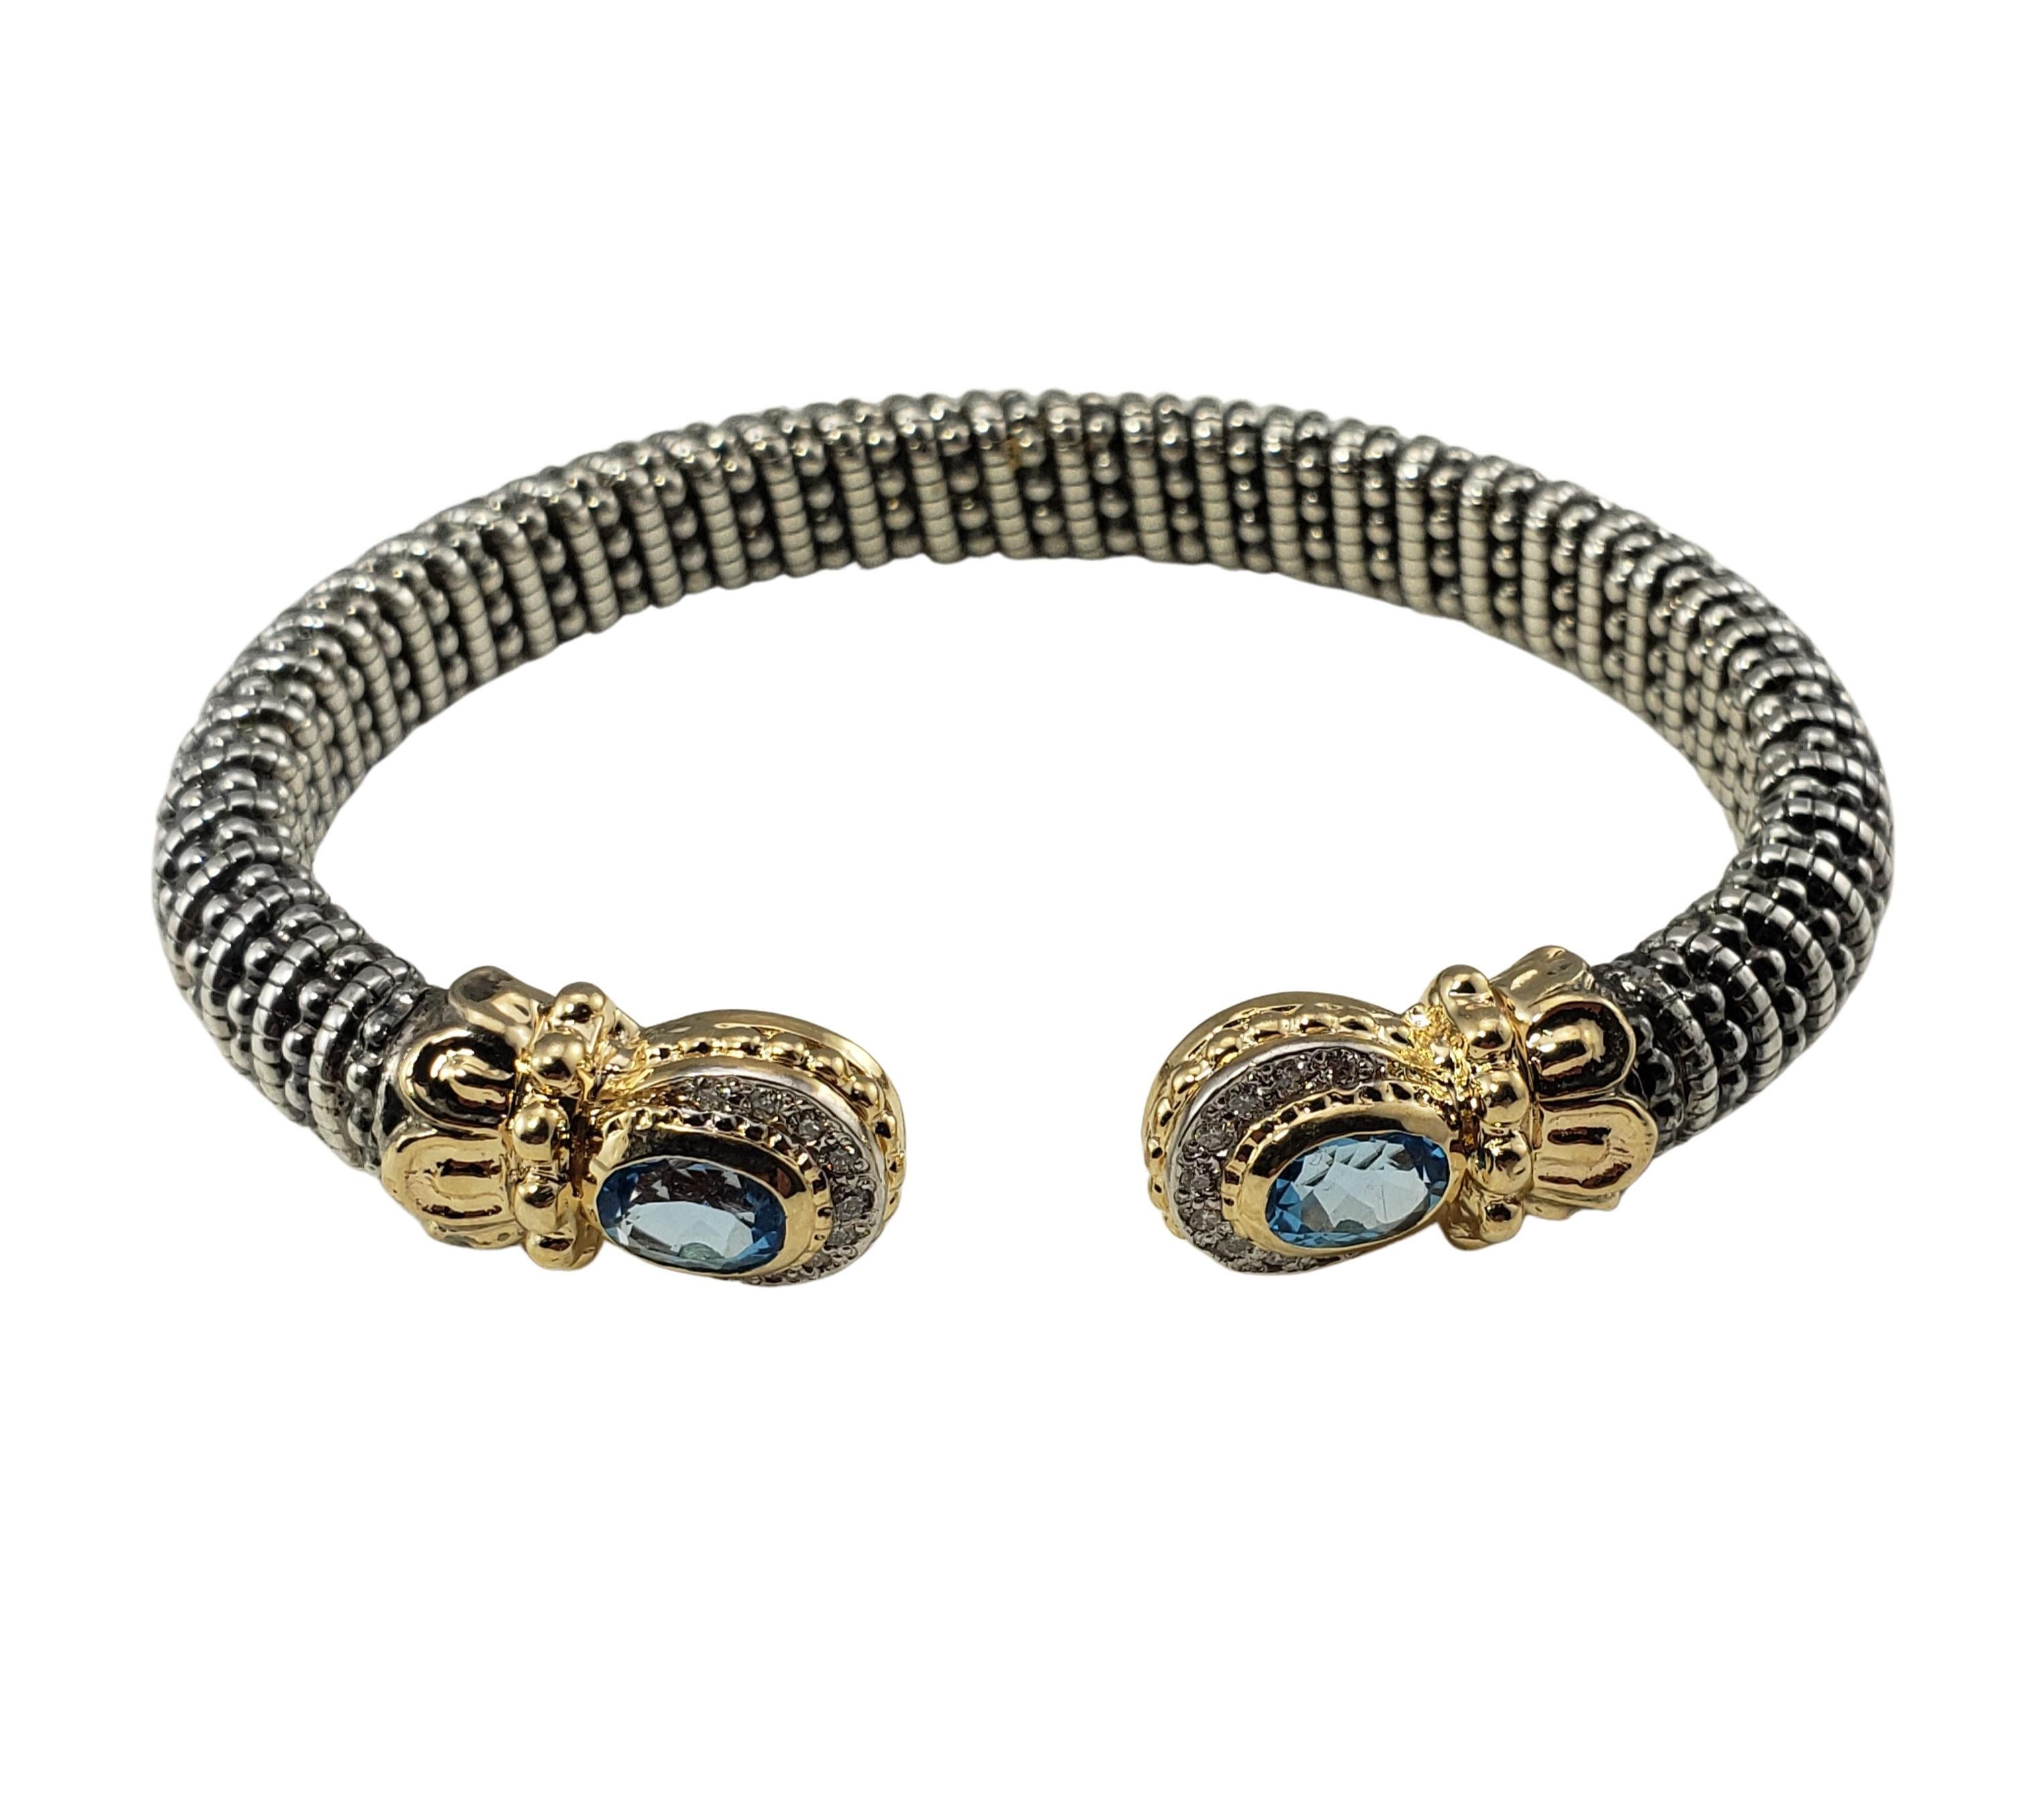 Vahan Sterling Silver/14 Karat Yellow Gold Blue Topaz and Diamond Bracelet-

This stunning open bracelet features two oval blue topaz gemstones (7 mm x 5 mm) and 18 round brilliant cut diamonds set in beautifully detailed sterling silver and 14K